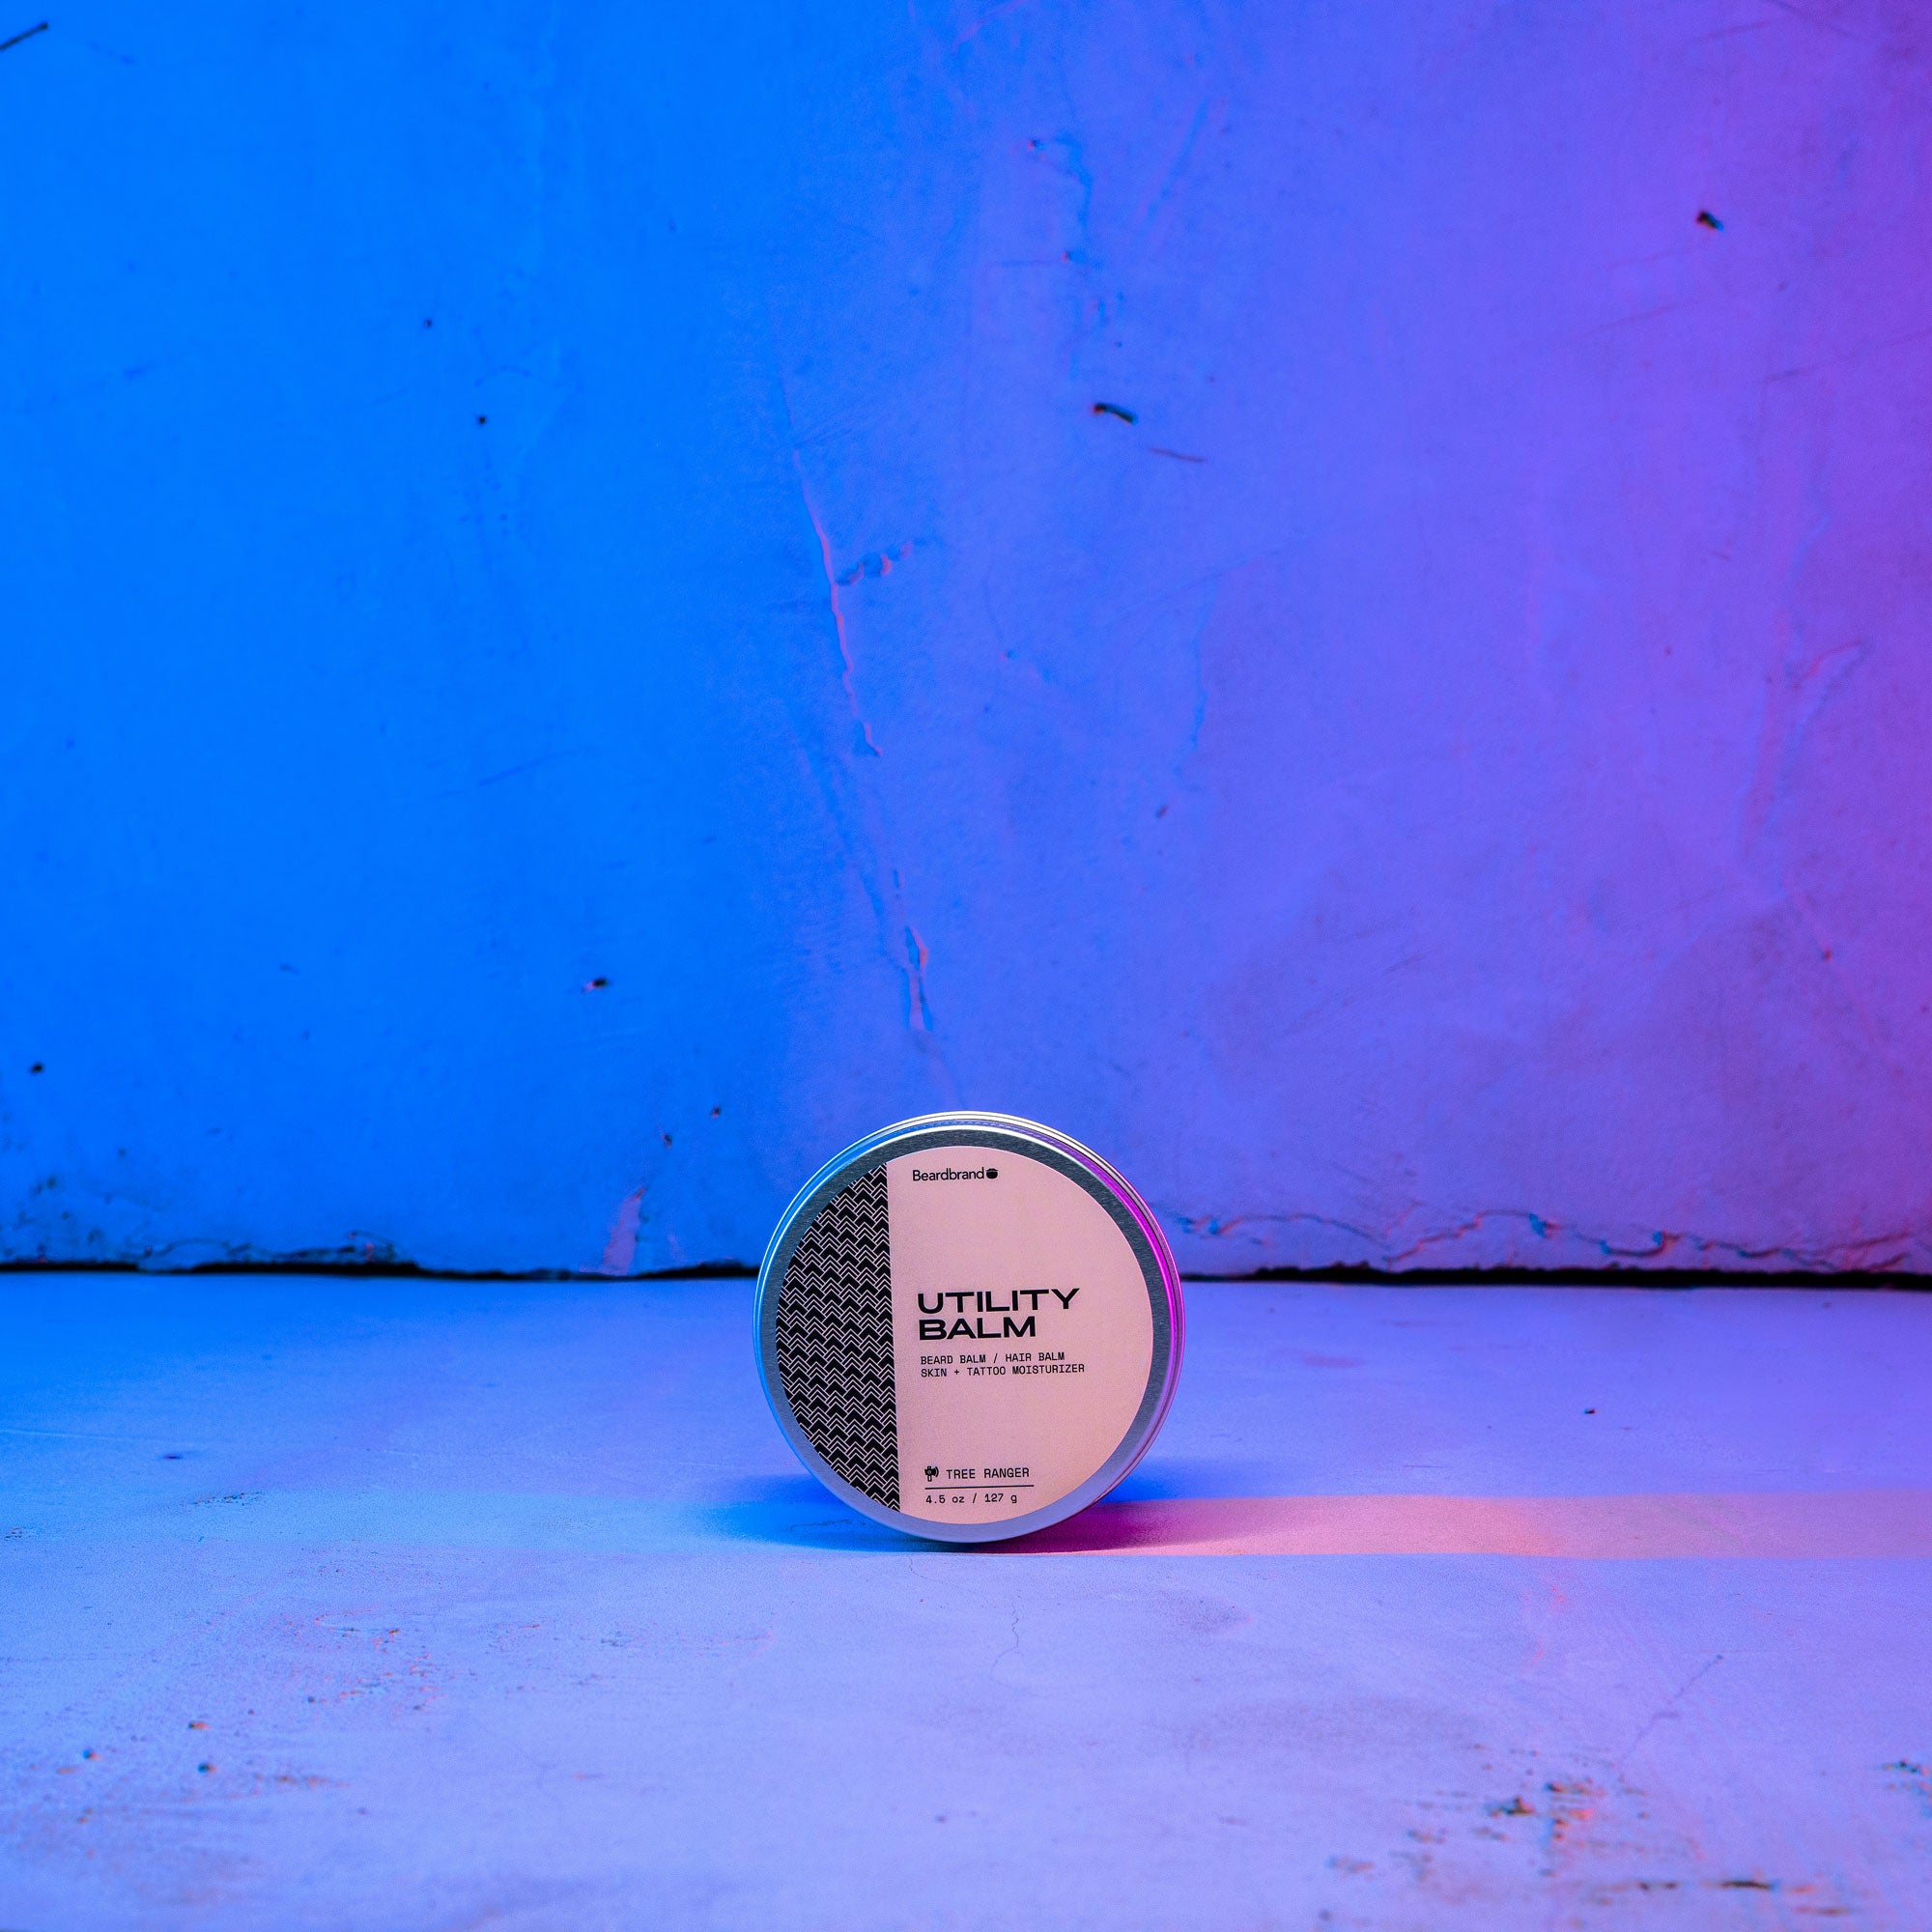 Beardbrand's Utility Balm set on a concrete backdrop highlighted in blue and pink lighting with the label facing forward.